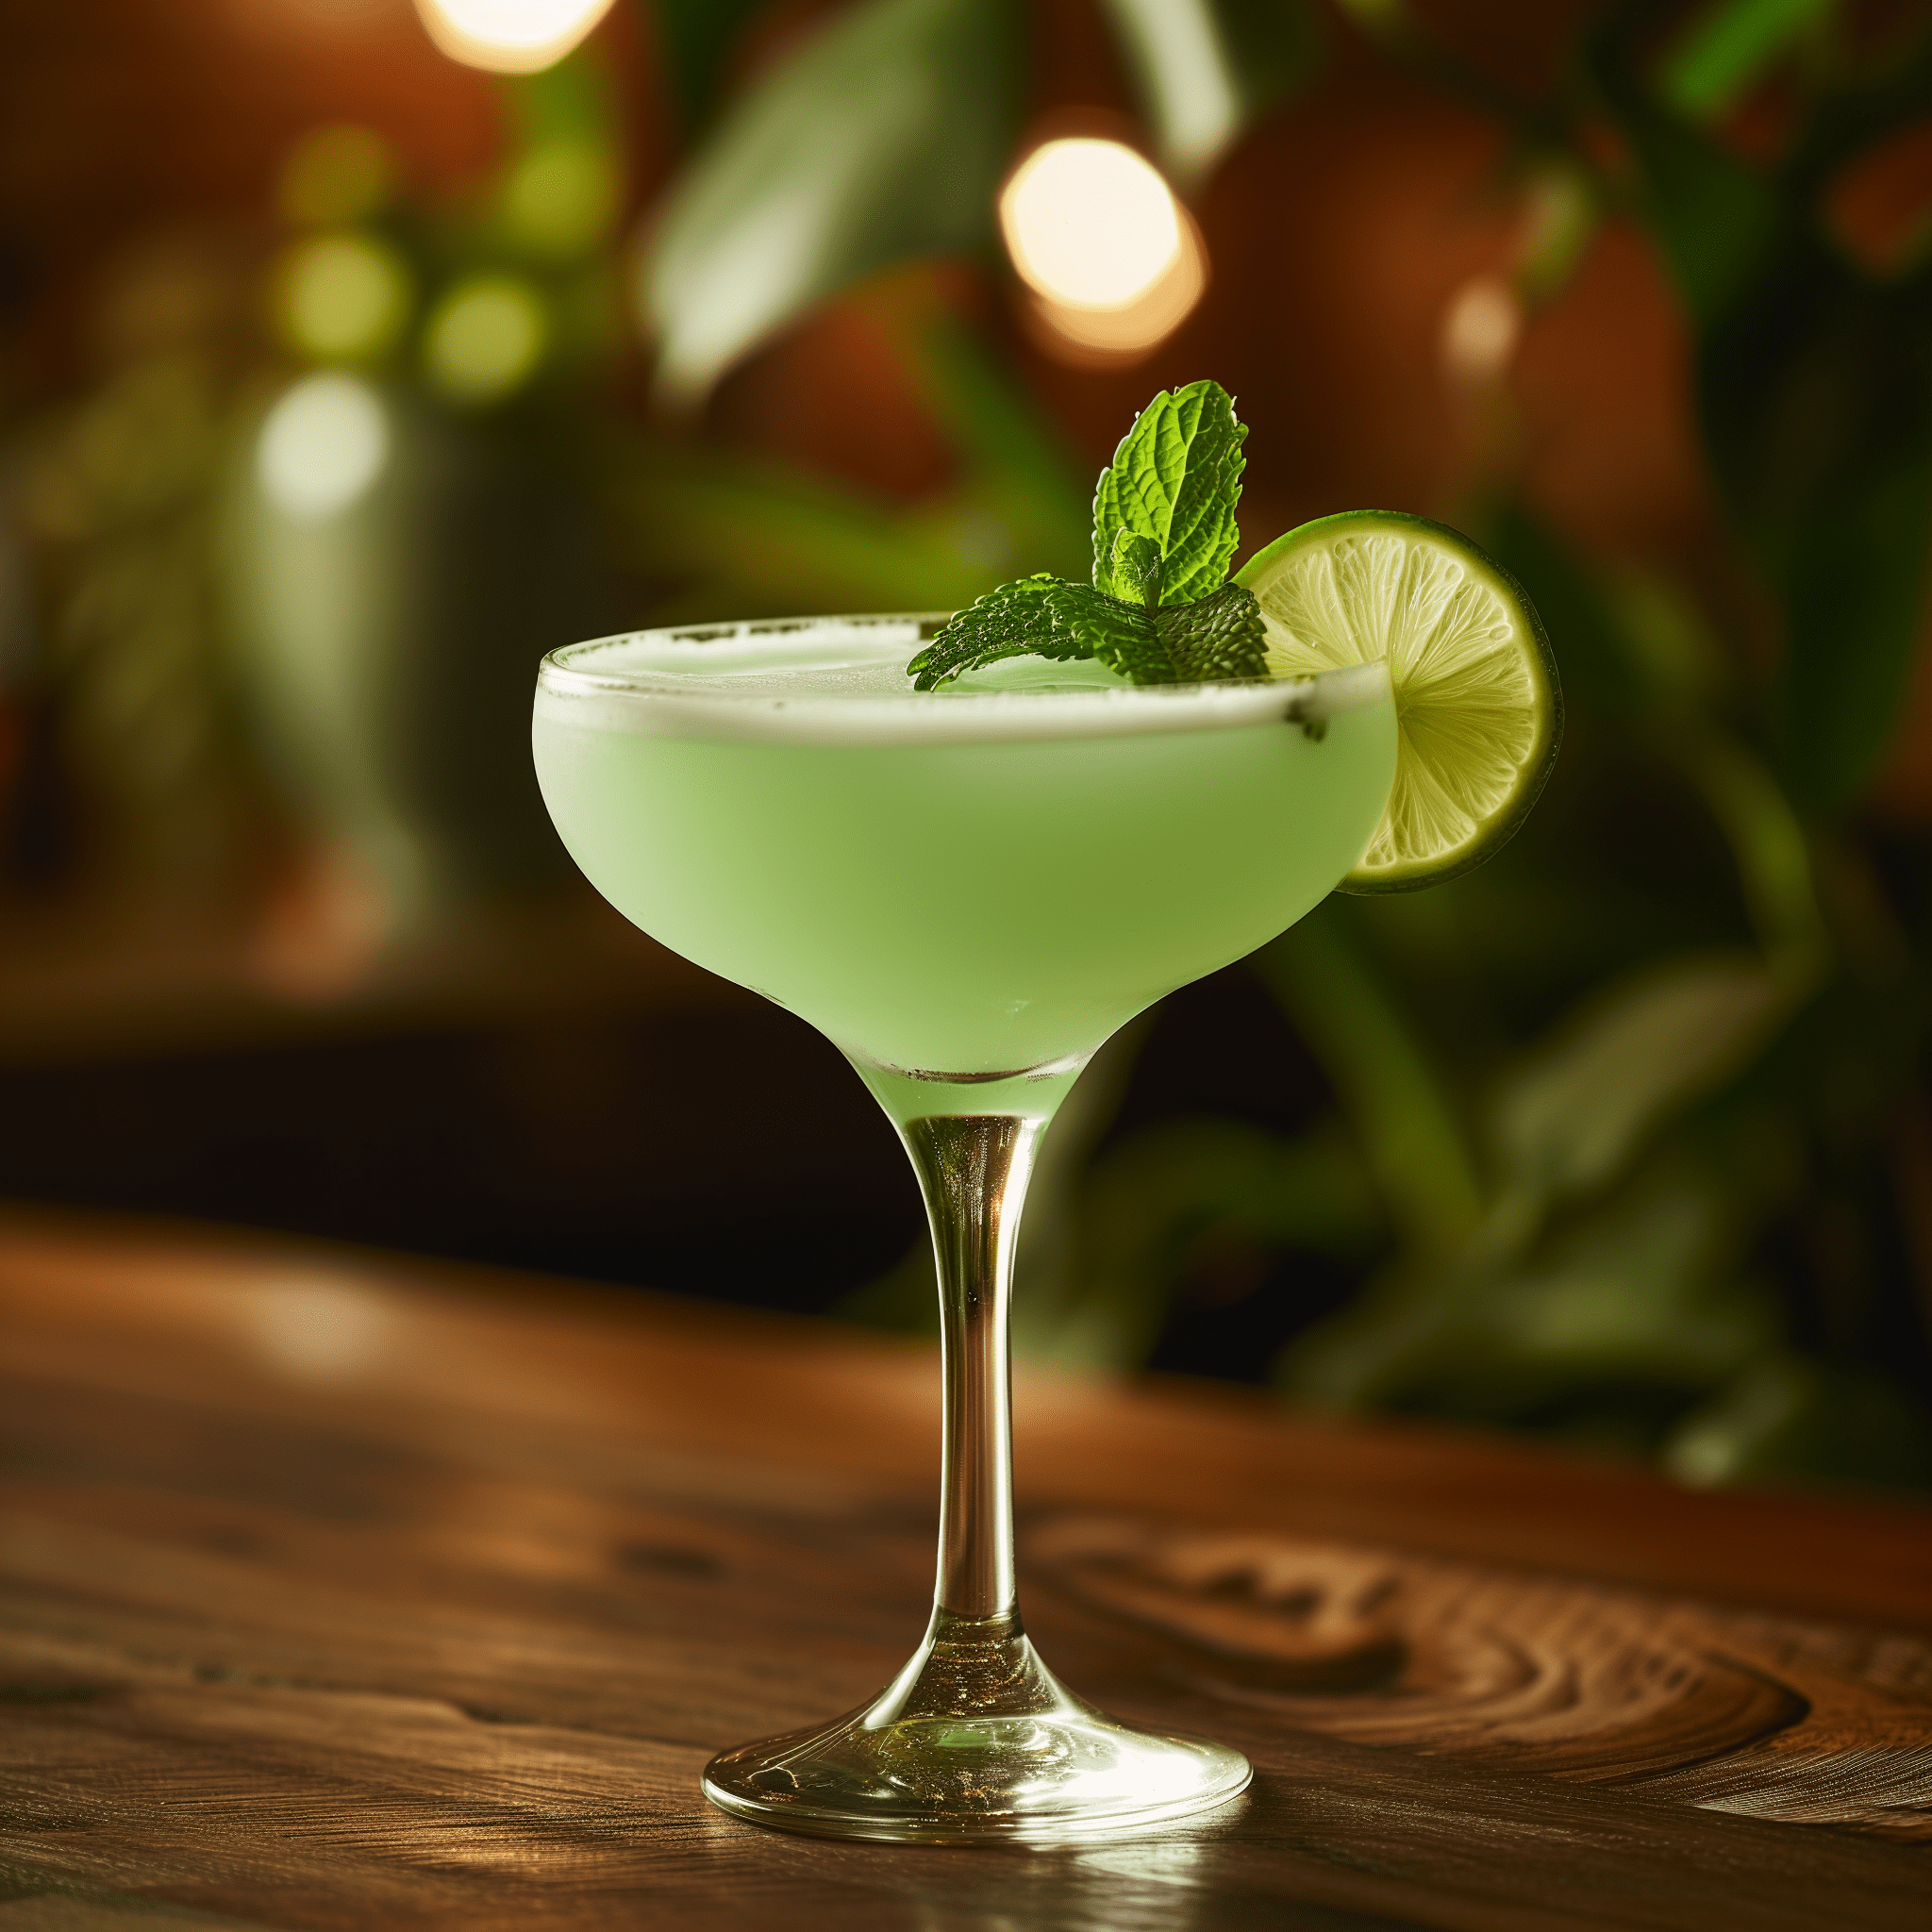 Jade Daiquiri Cocktail Recipe - The Jade Daiquiri has a refreshing, minty, and slightly sweet flavor profile with a zesty lime kick. The Mount Gay Silver rum provides a smooth and light rum base, while the Cointreau adds a subtle orange complexity.